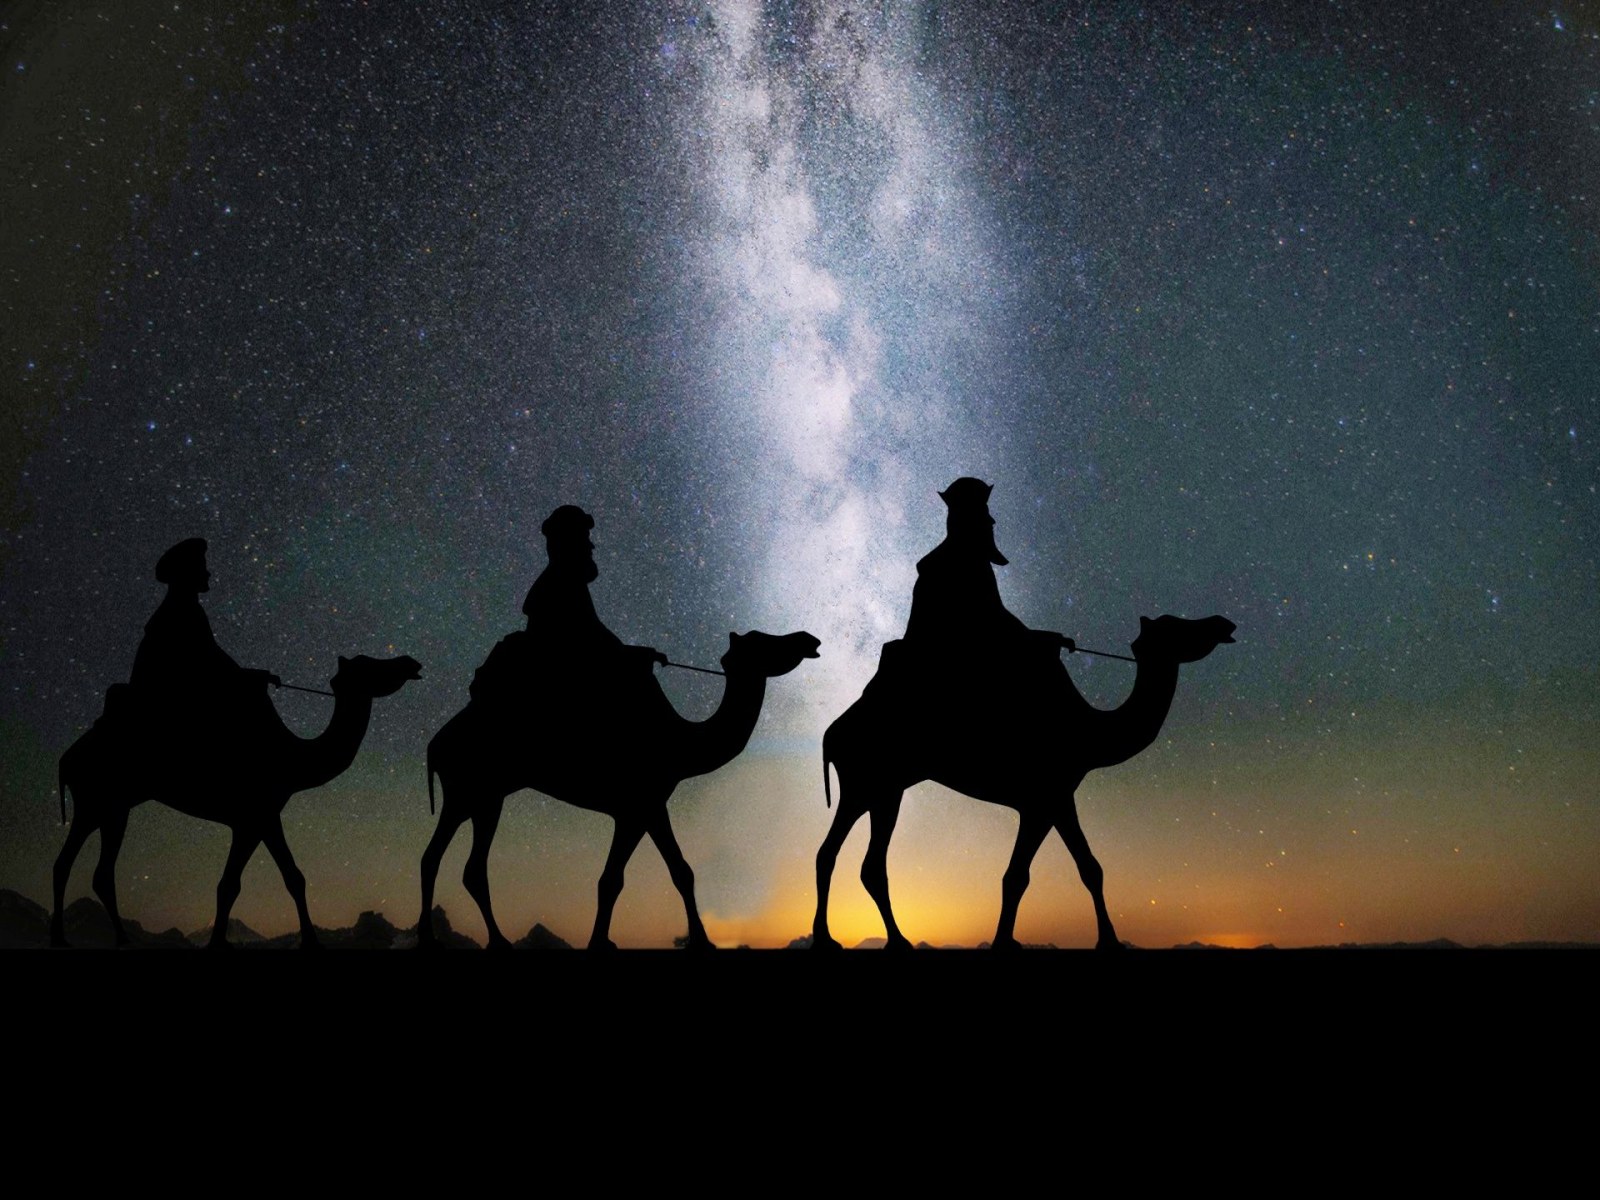 Epiphany: Ancient Christian Text Adds to Biblical Story of the Magi Traveling to Bethlehem for Birth of Jesus